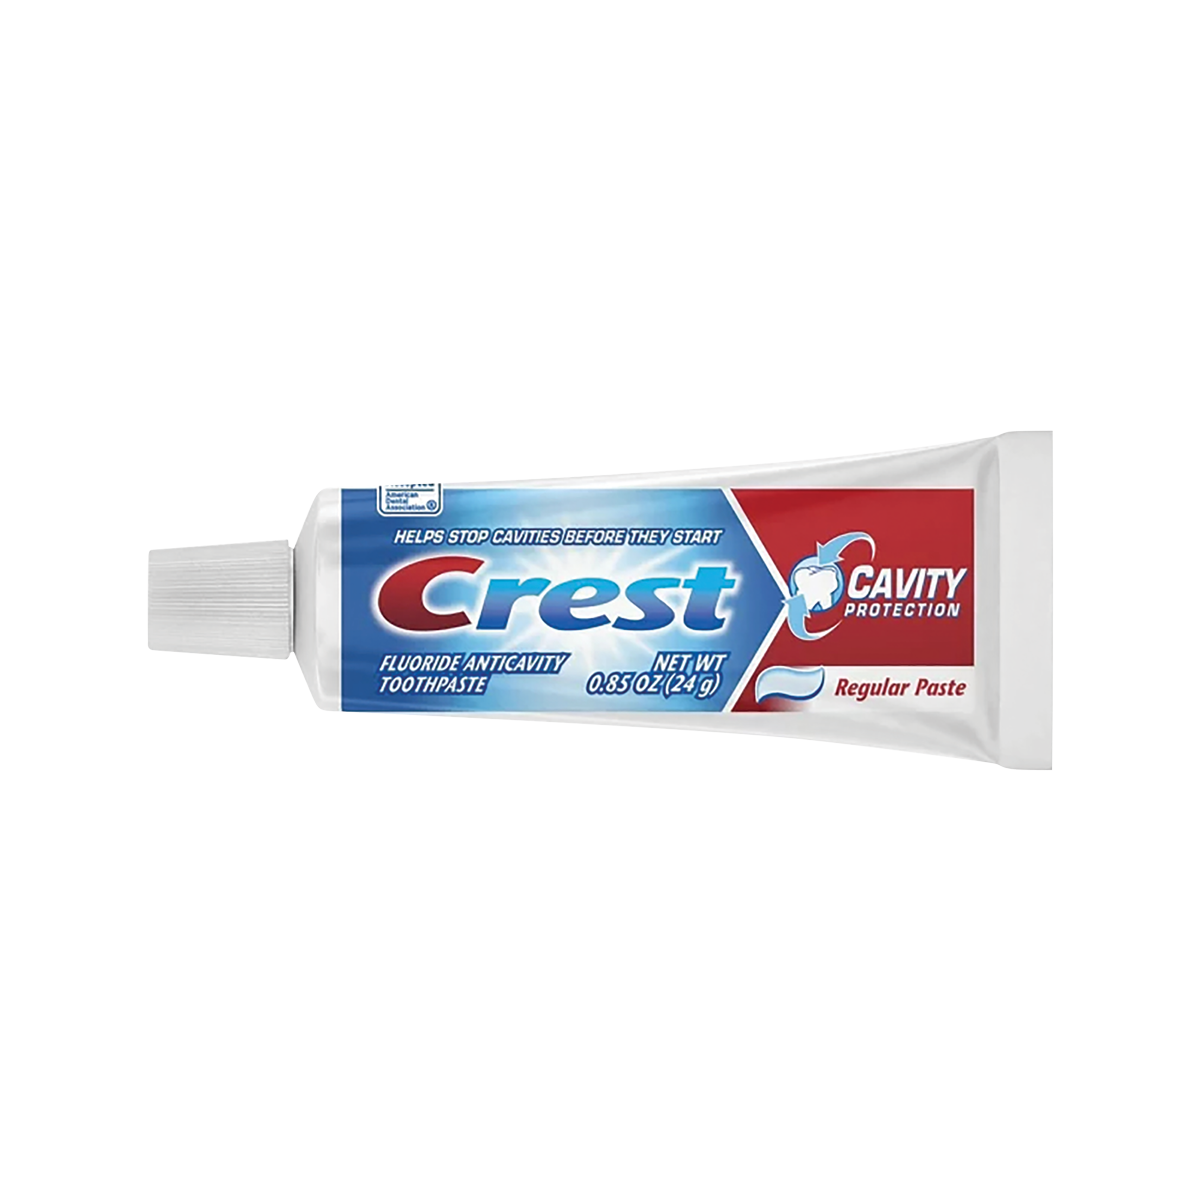 Crest Cavity Protection Travel Toothpaste